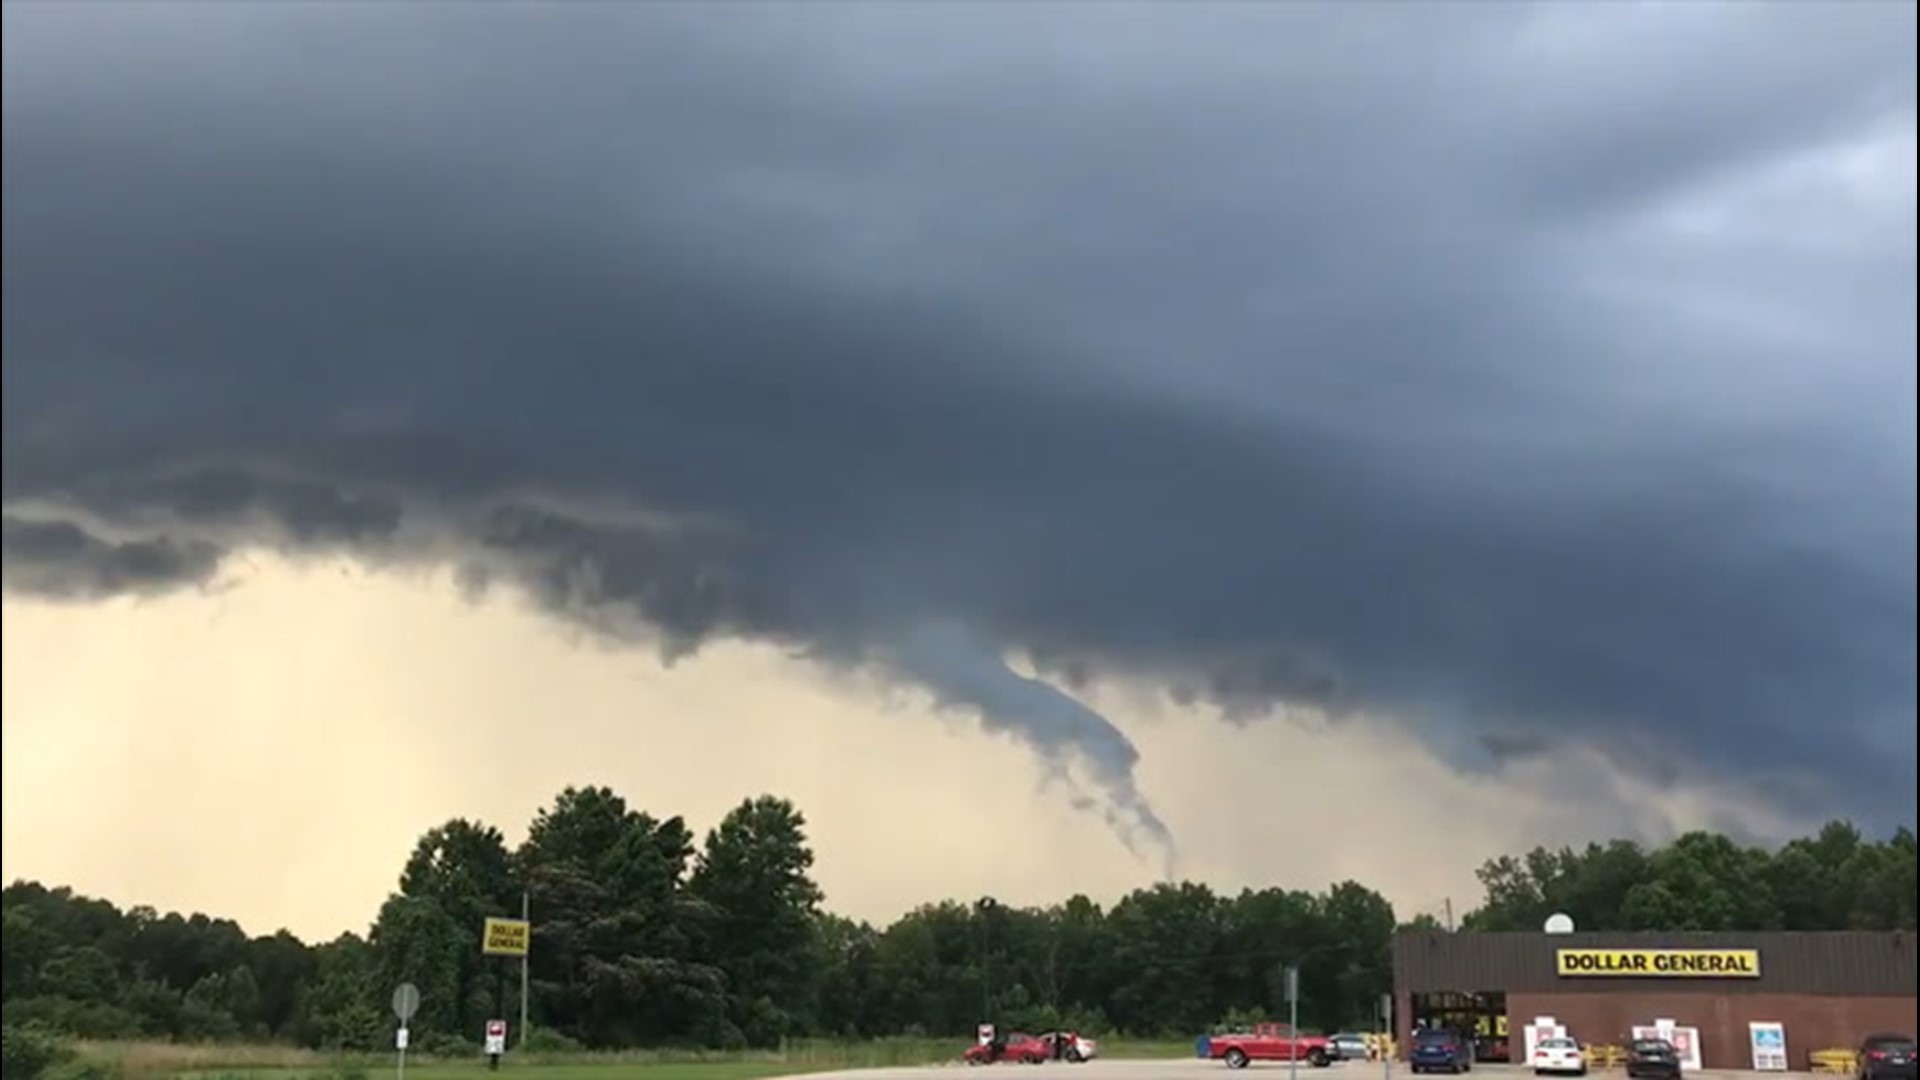 Dark clouds formed over Natural Bridge, Alabama, on June 30, as several severe storms passed through the area throughout the day.